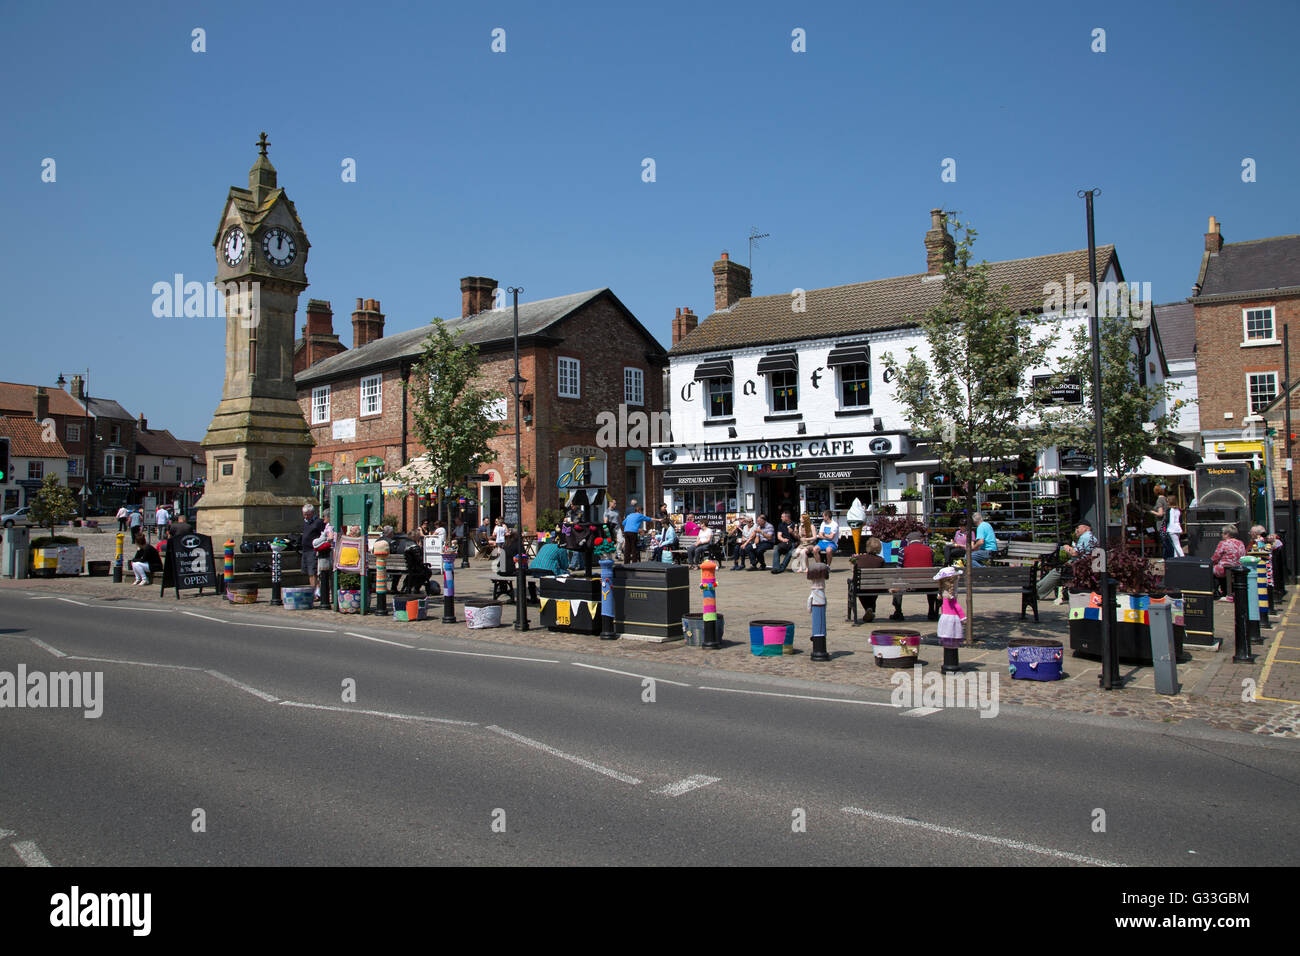 The market square in Thirsk, North Yorkshire in England Stock Photo